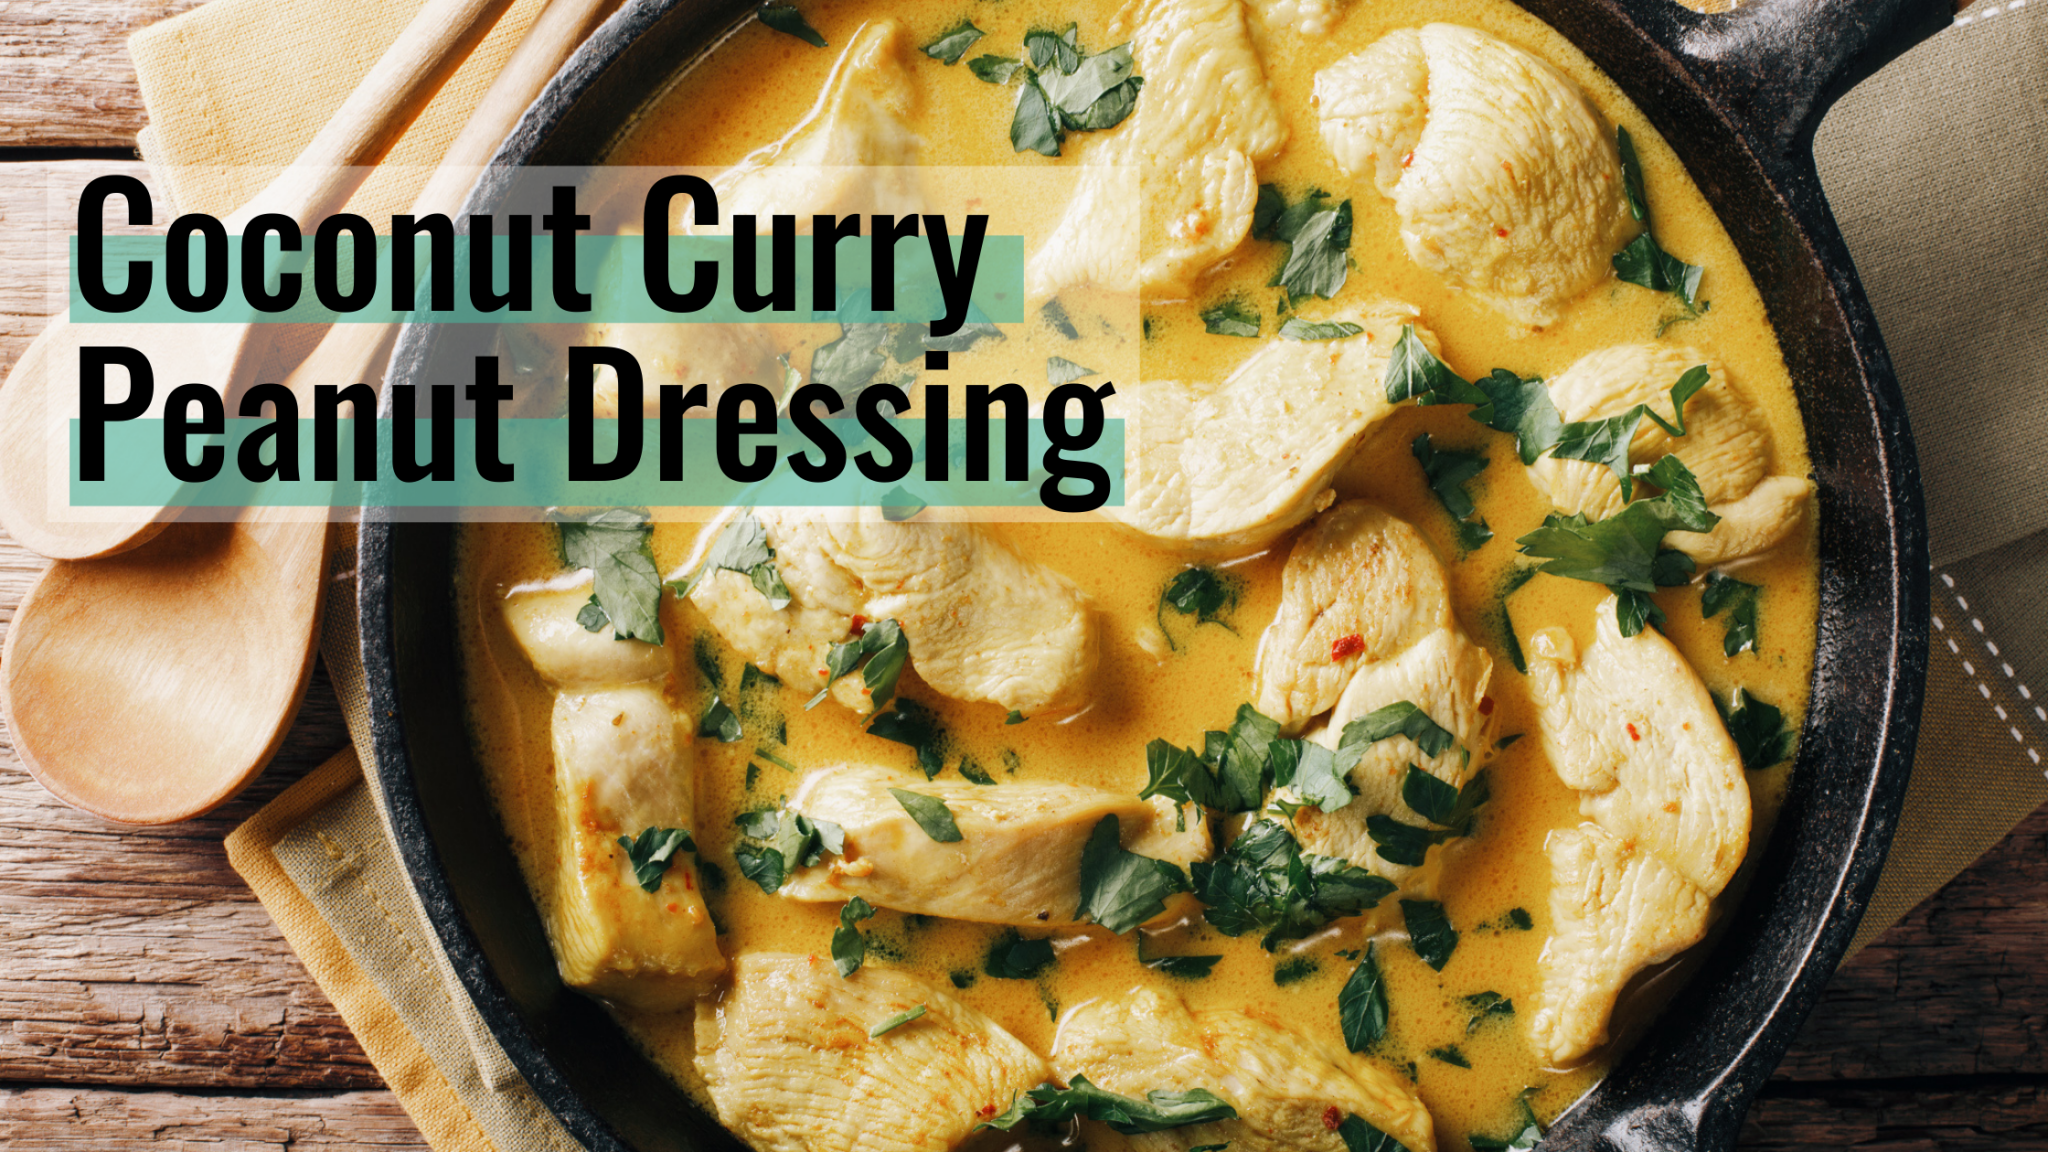 Bowl of Coconut Curry Peanut Dressing with Chicken and Herbs